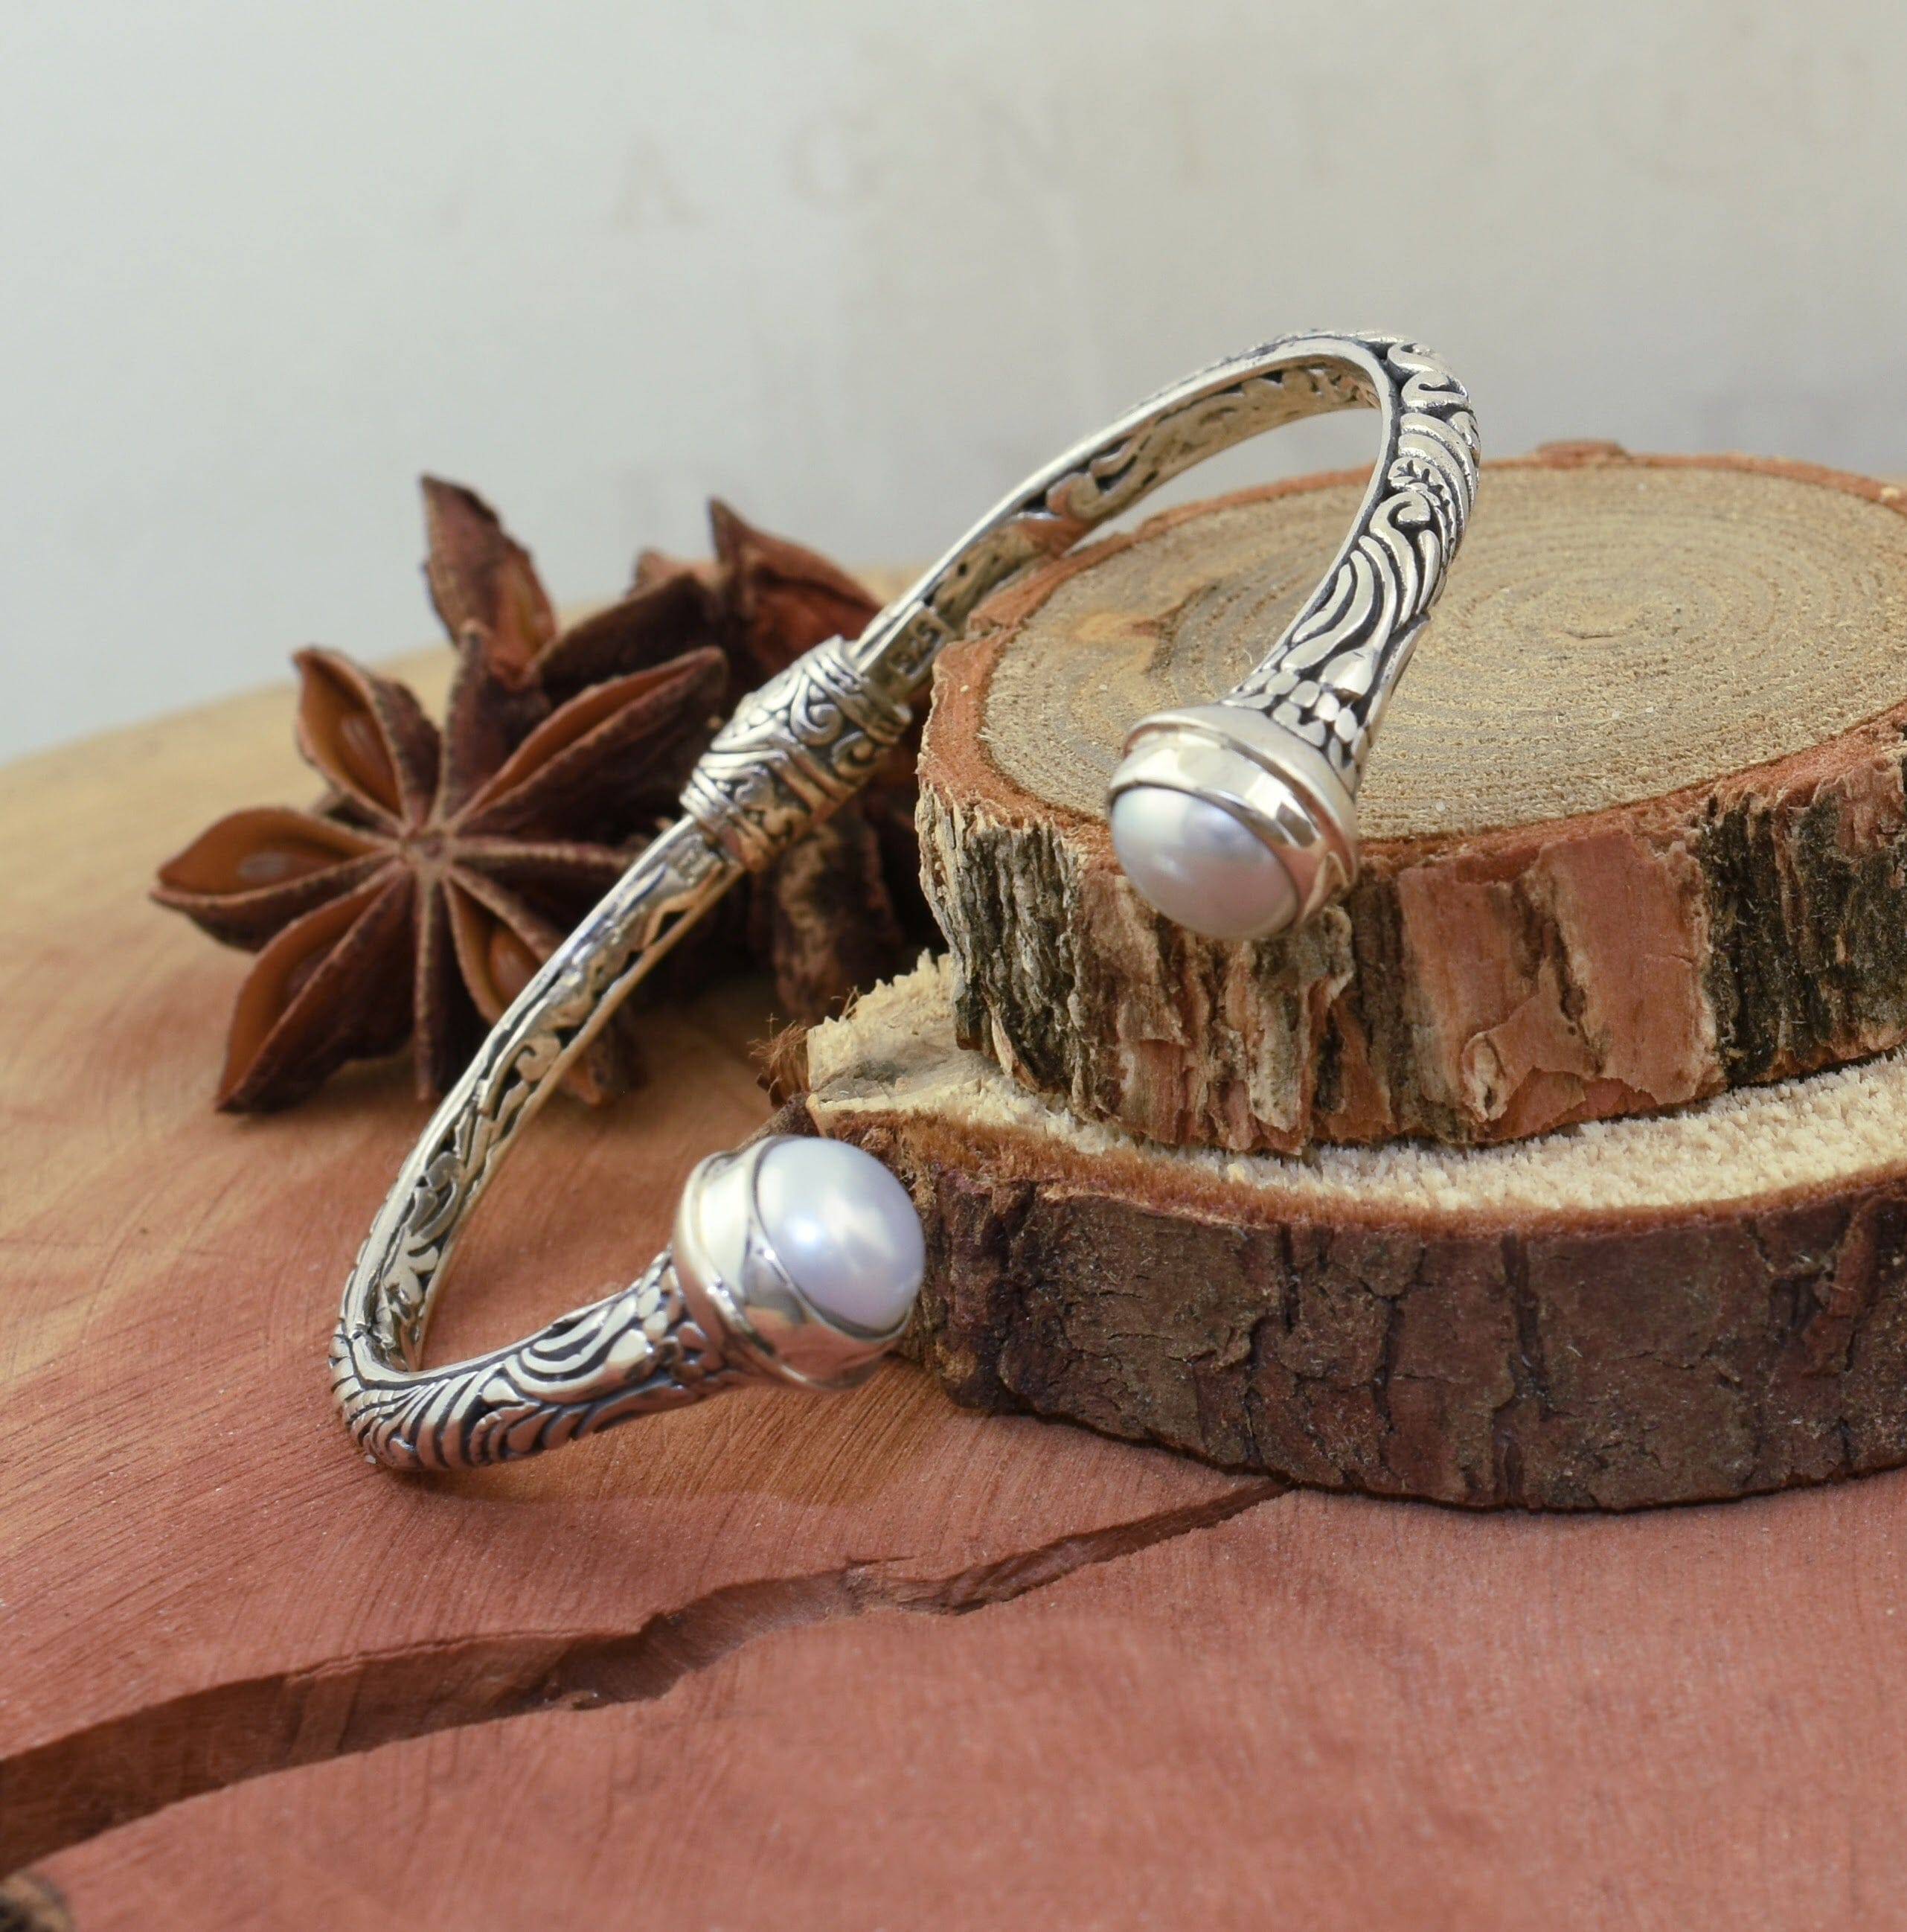 Bali-detailed cuff bracelet with freshwater pearls